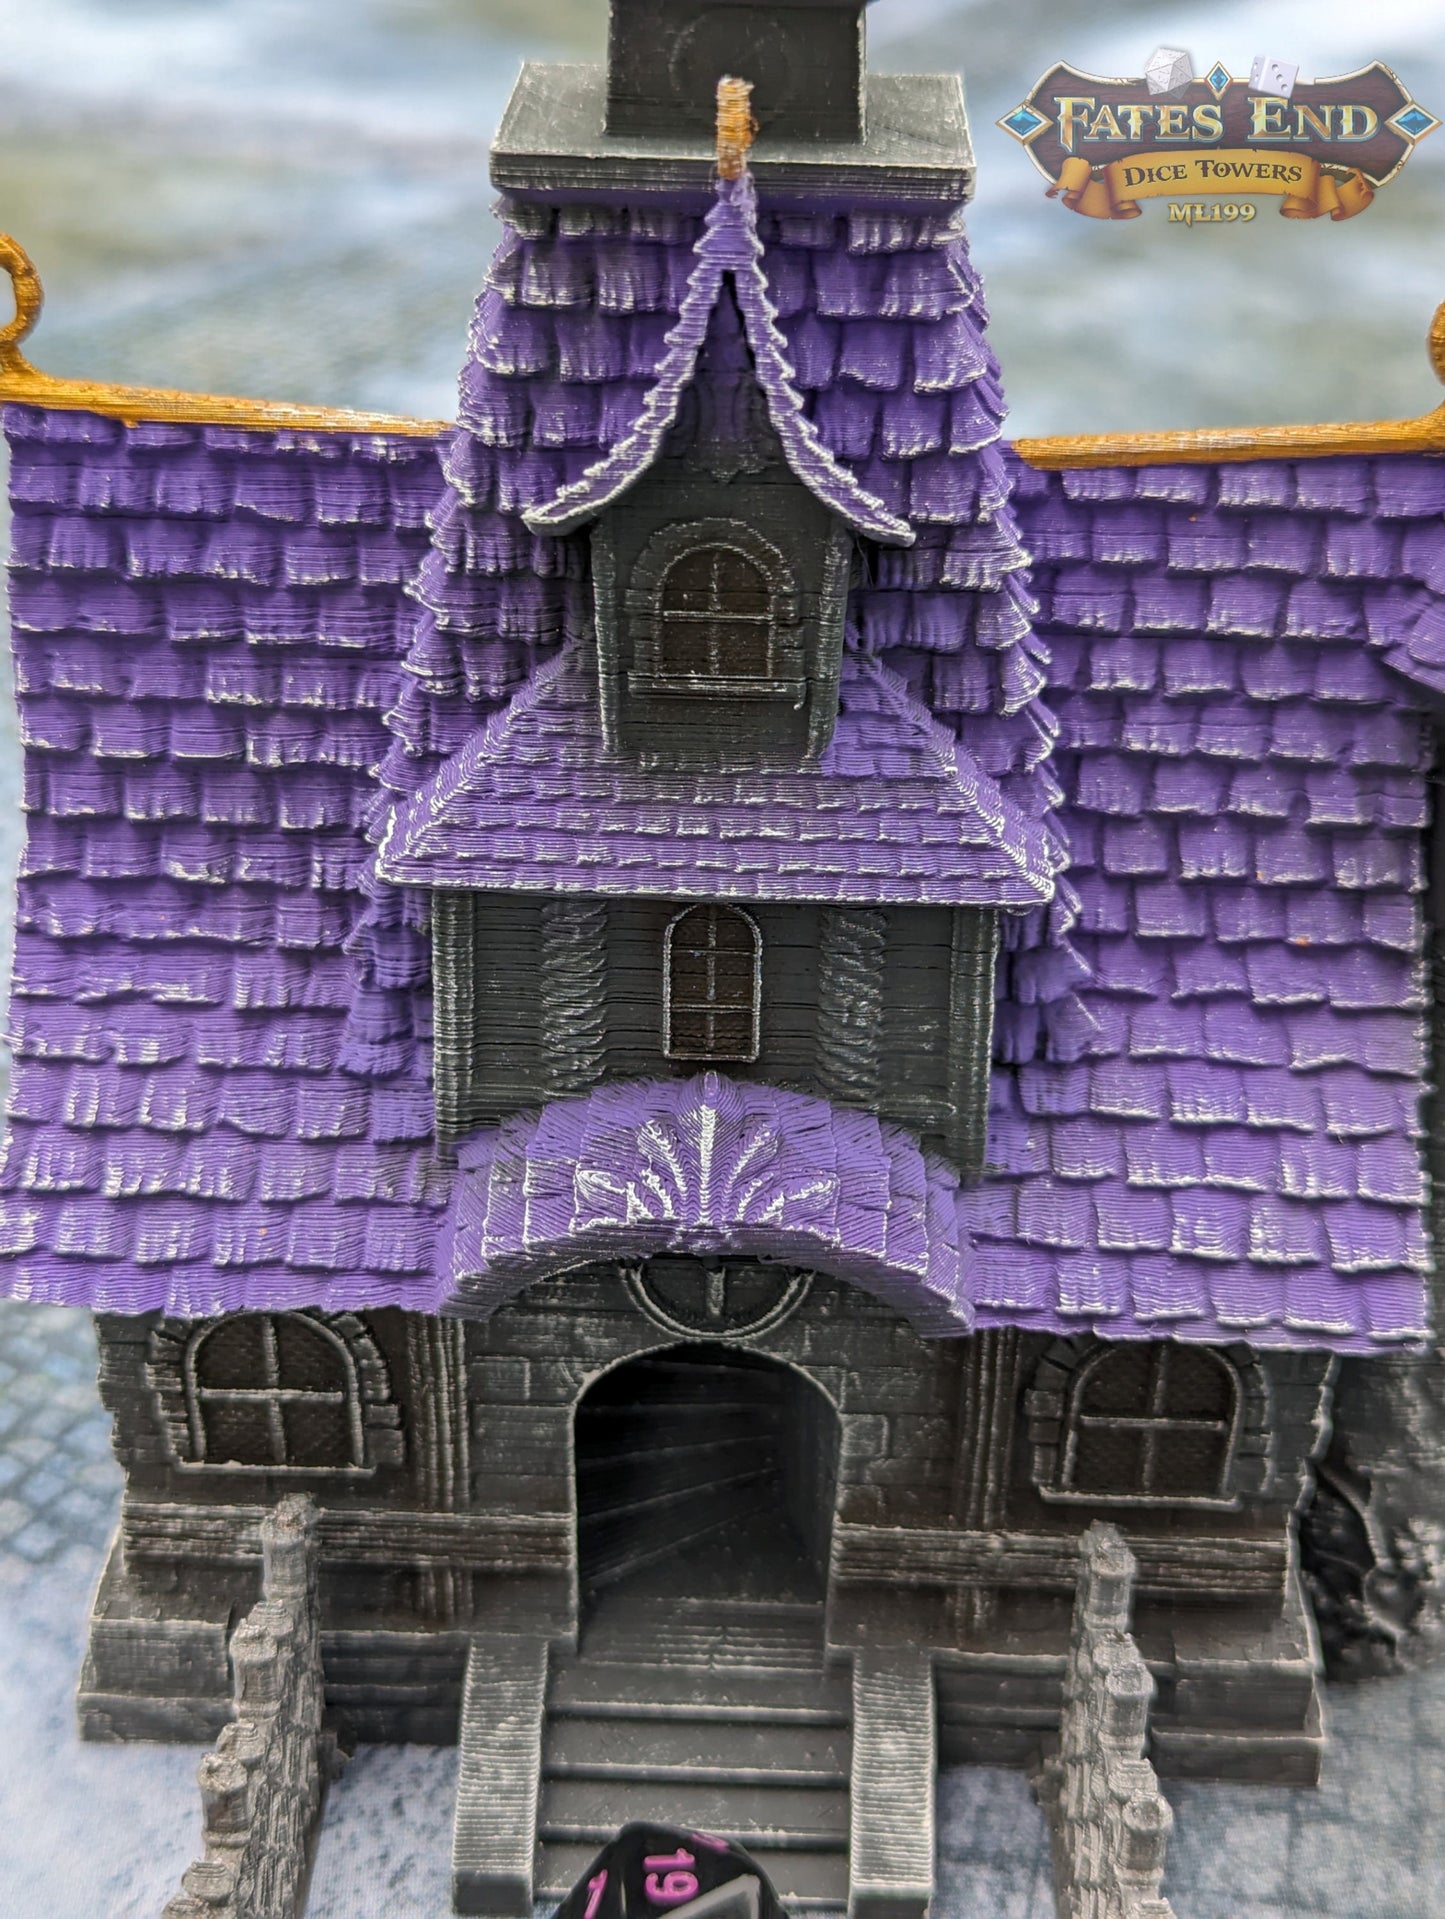 Orphanage-Schoolhouse Dice Tower-Fate's End-Furhaven